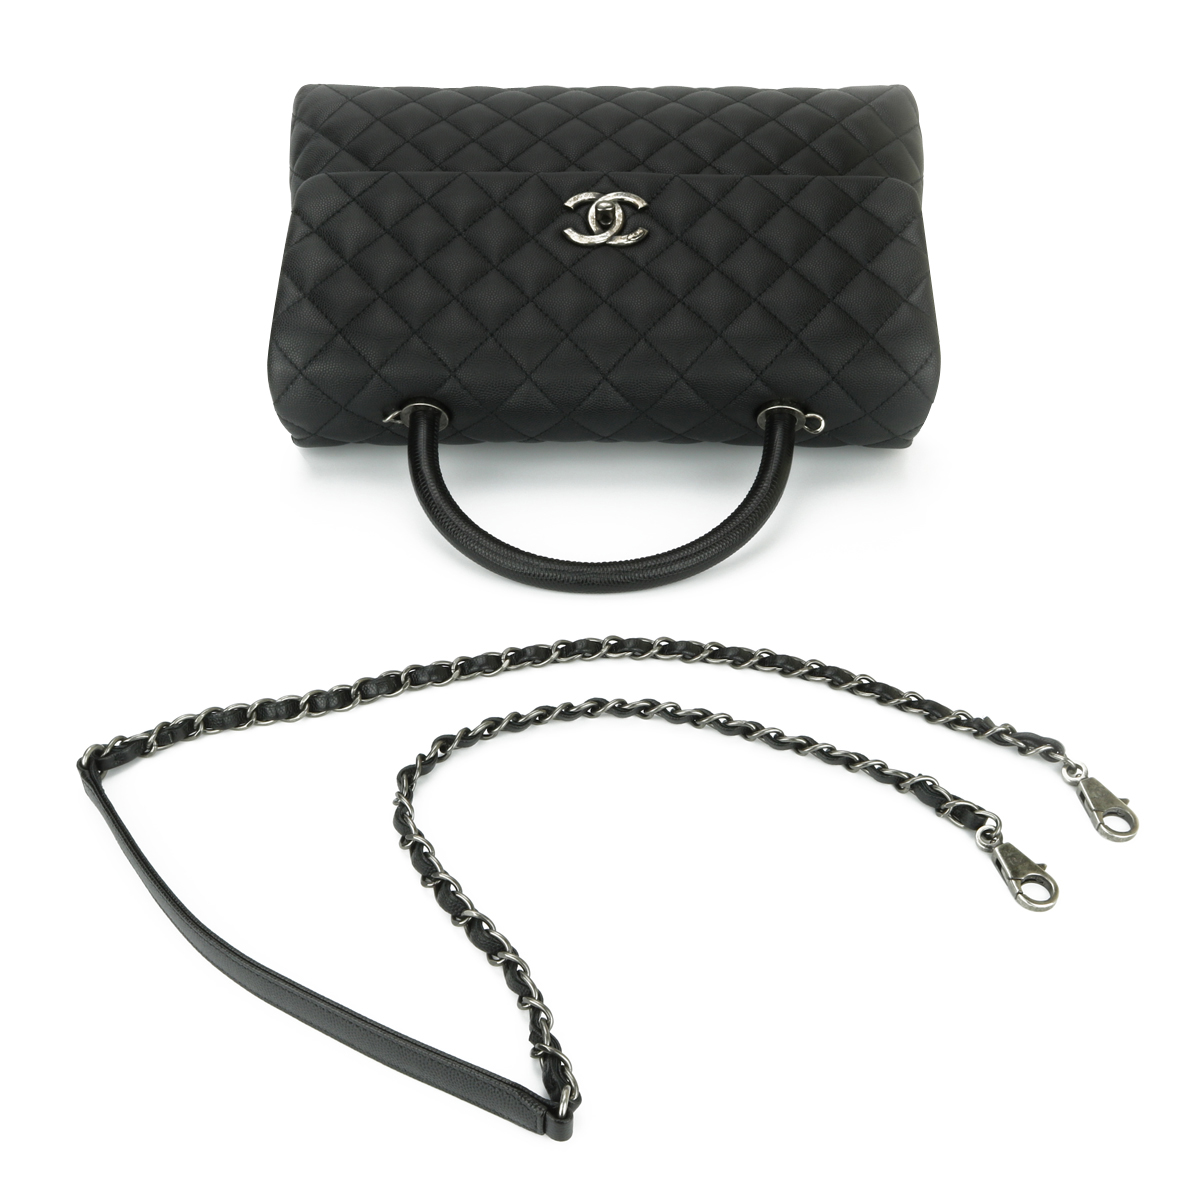 The History of the Chanel Coco Handle - luxfy